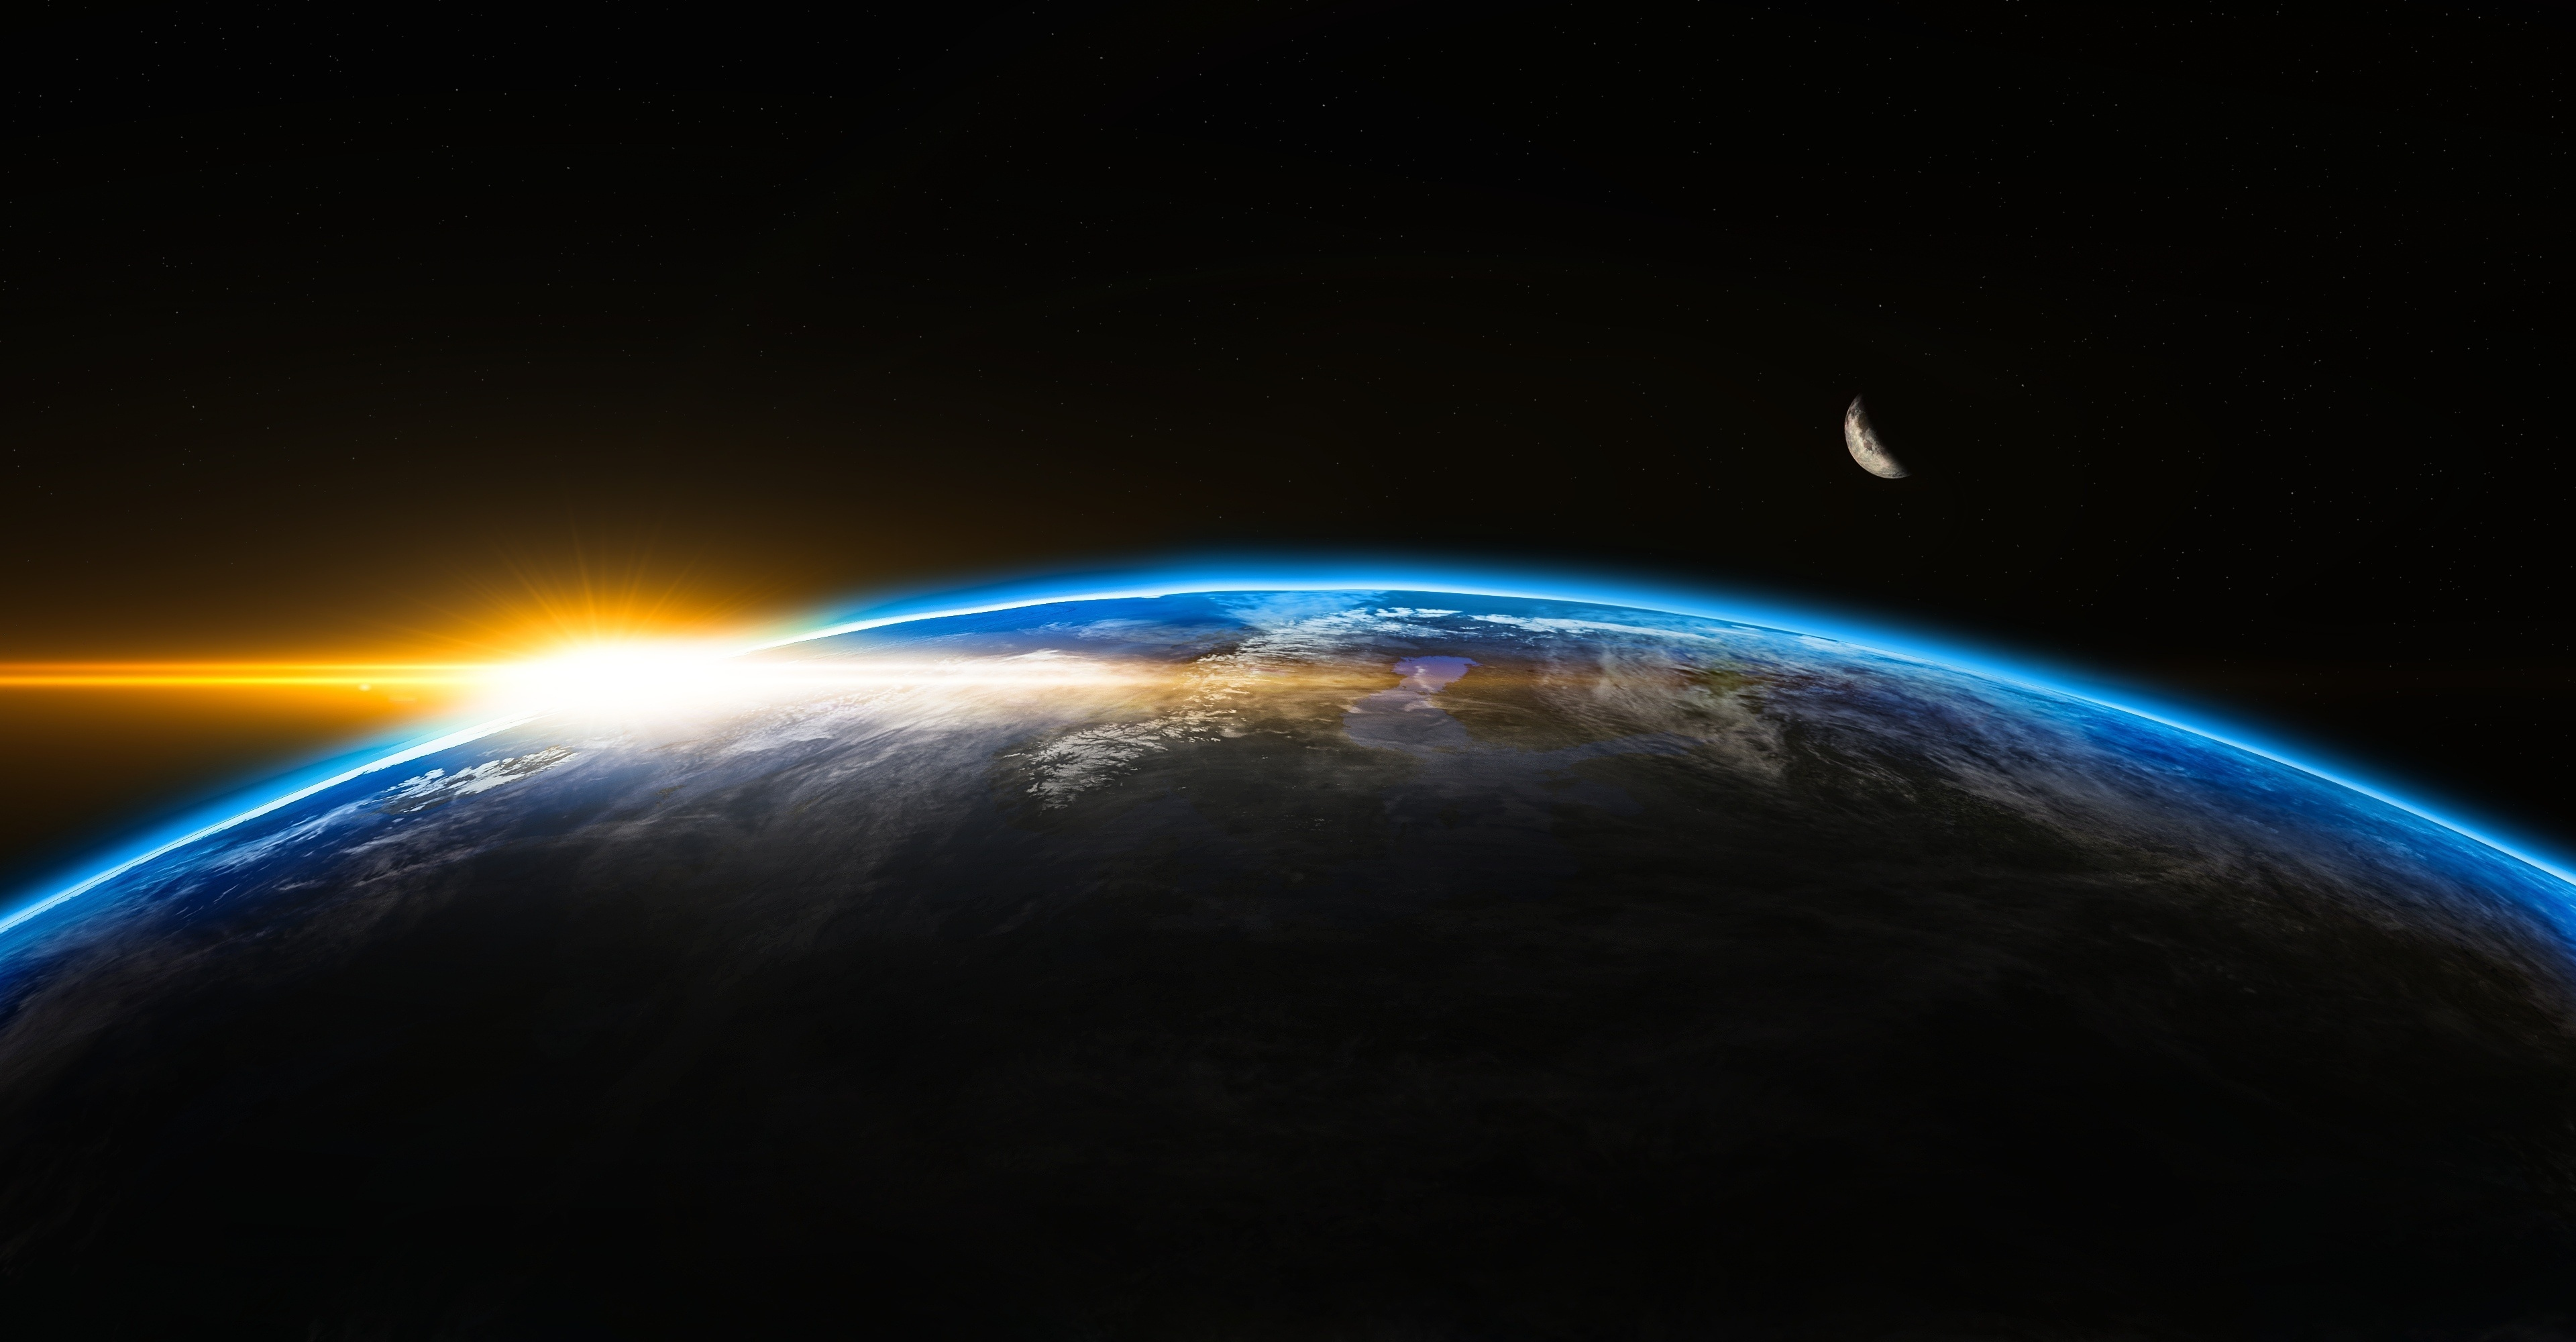 Download 3840x2400 wallpaper  earth  planet space moon  